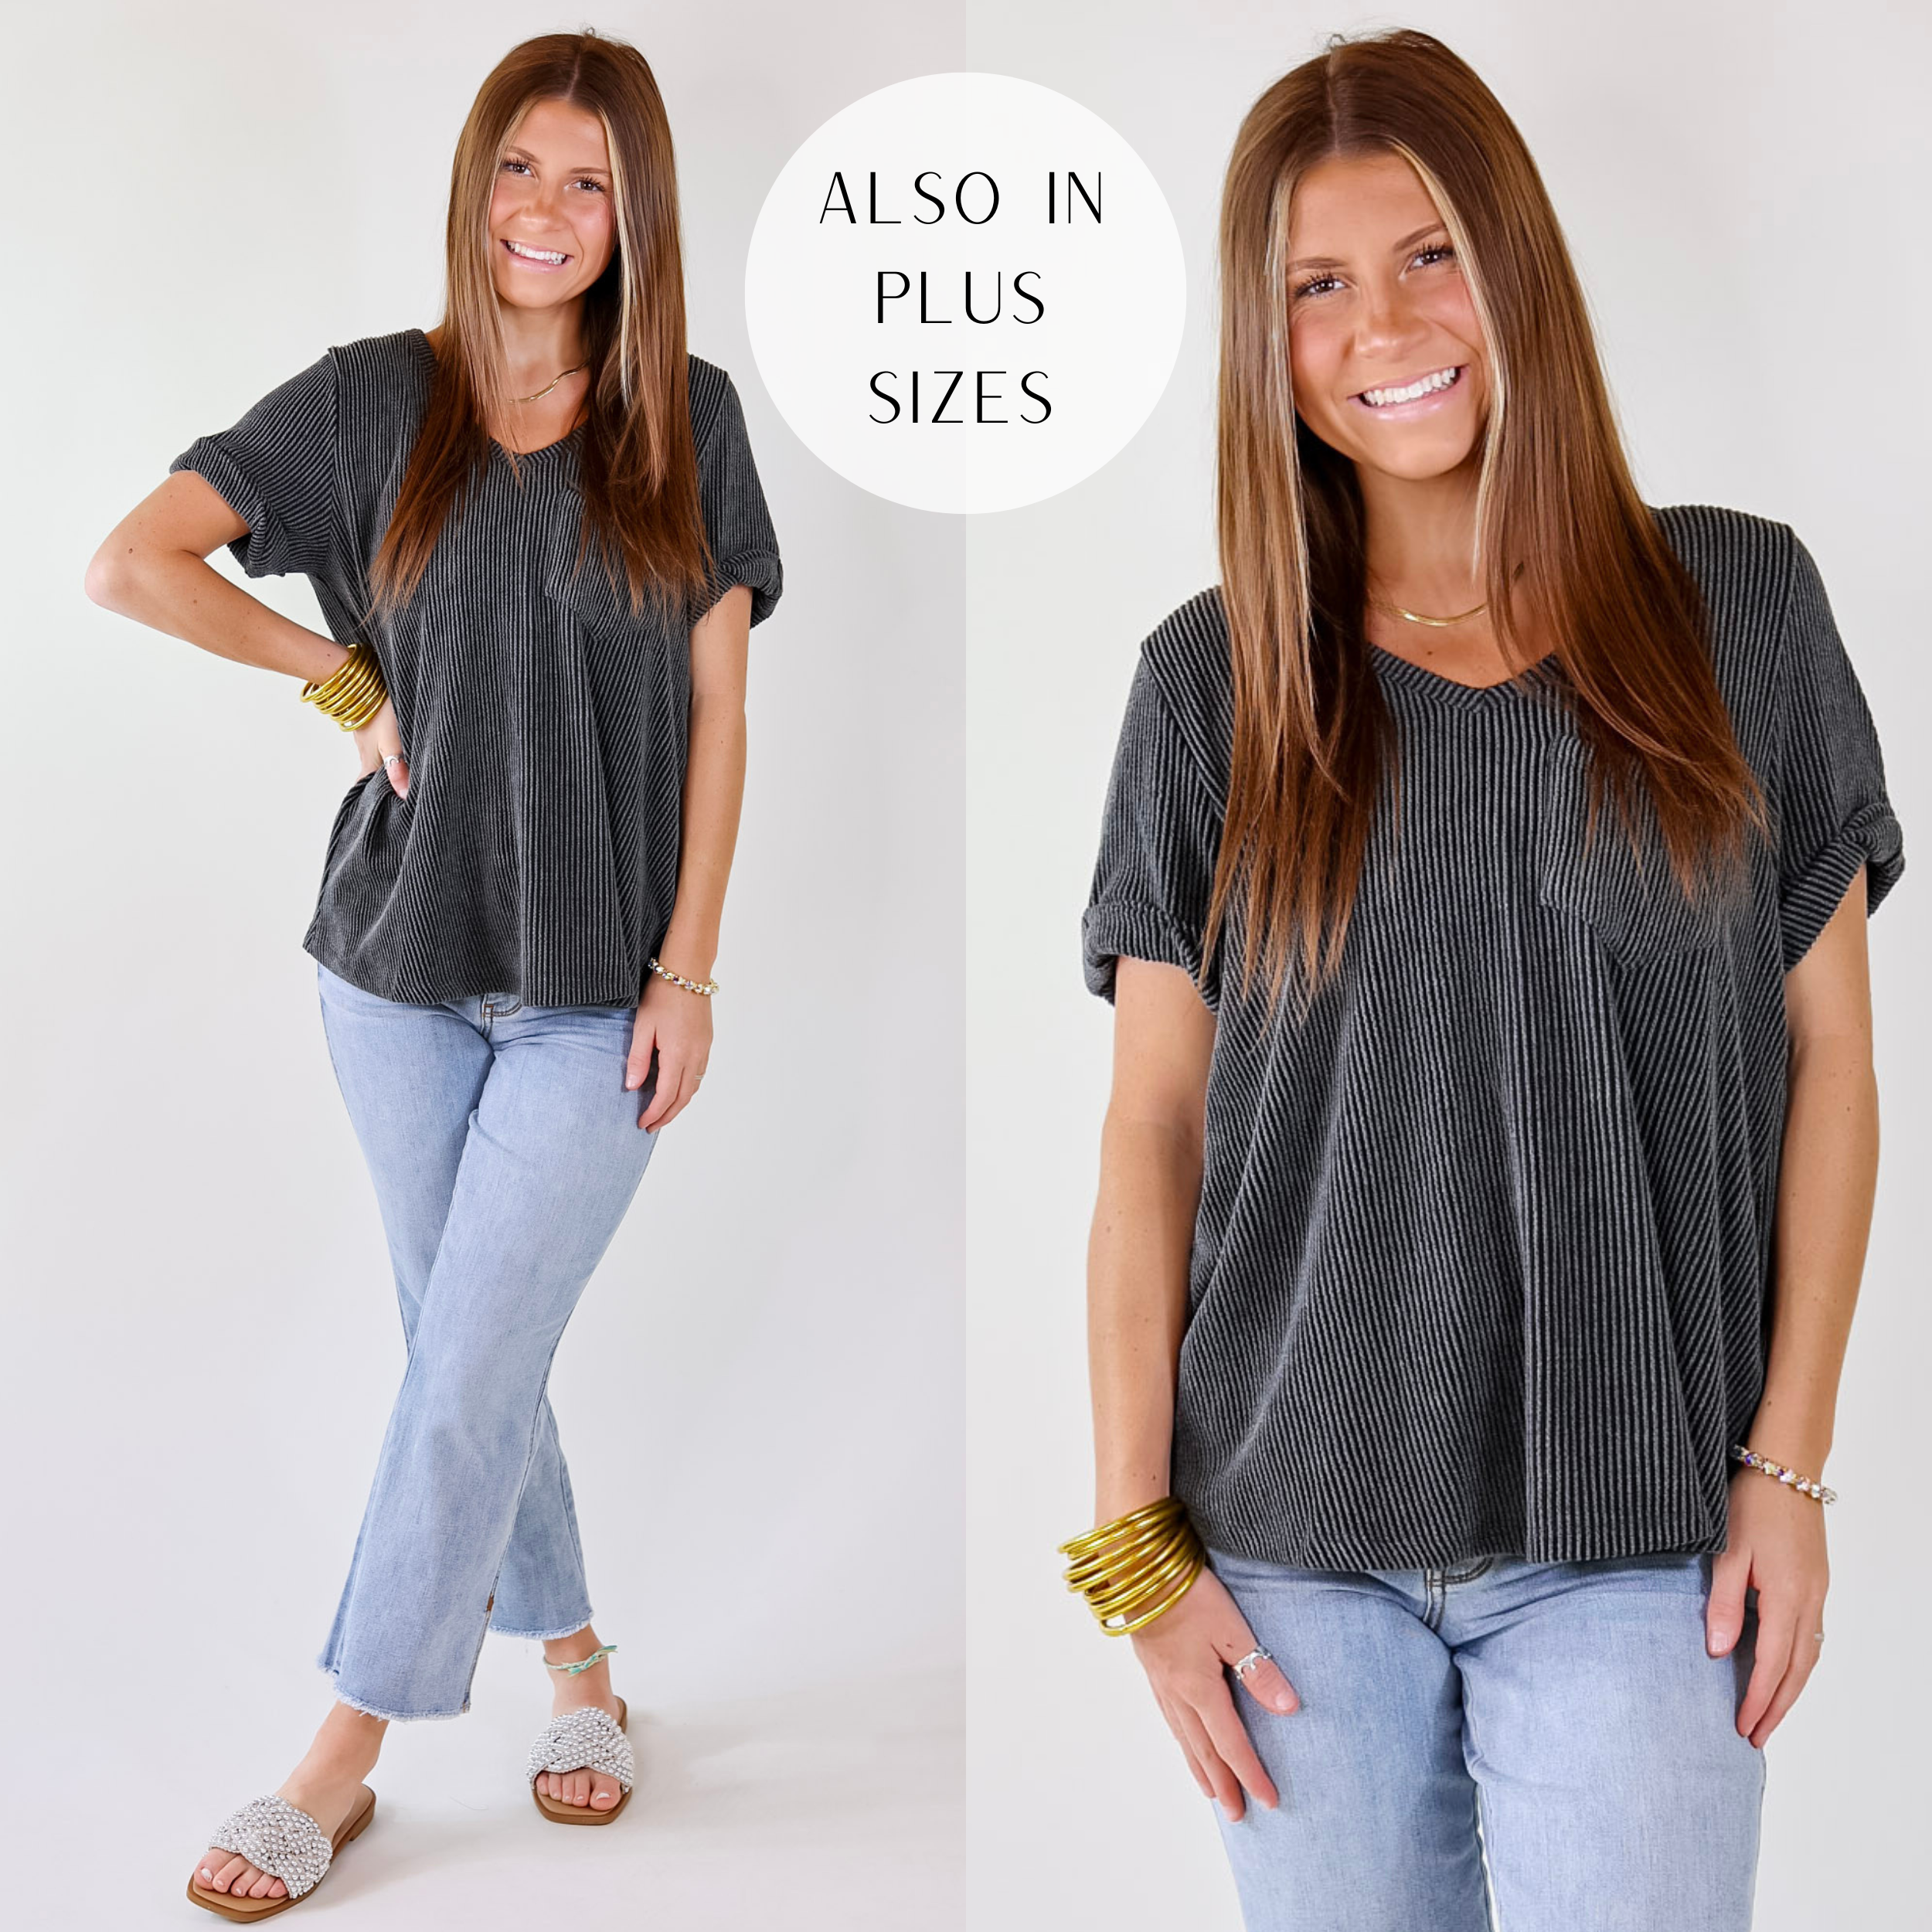 Model is wearing a charcoal grey short sleeve top featuring a ribbed fabric, cuffed sleeves, V neckline, and a front pocket.